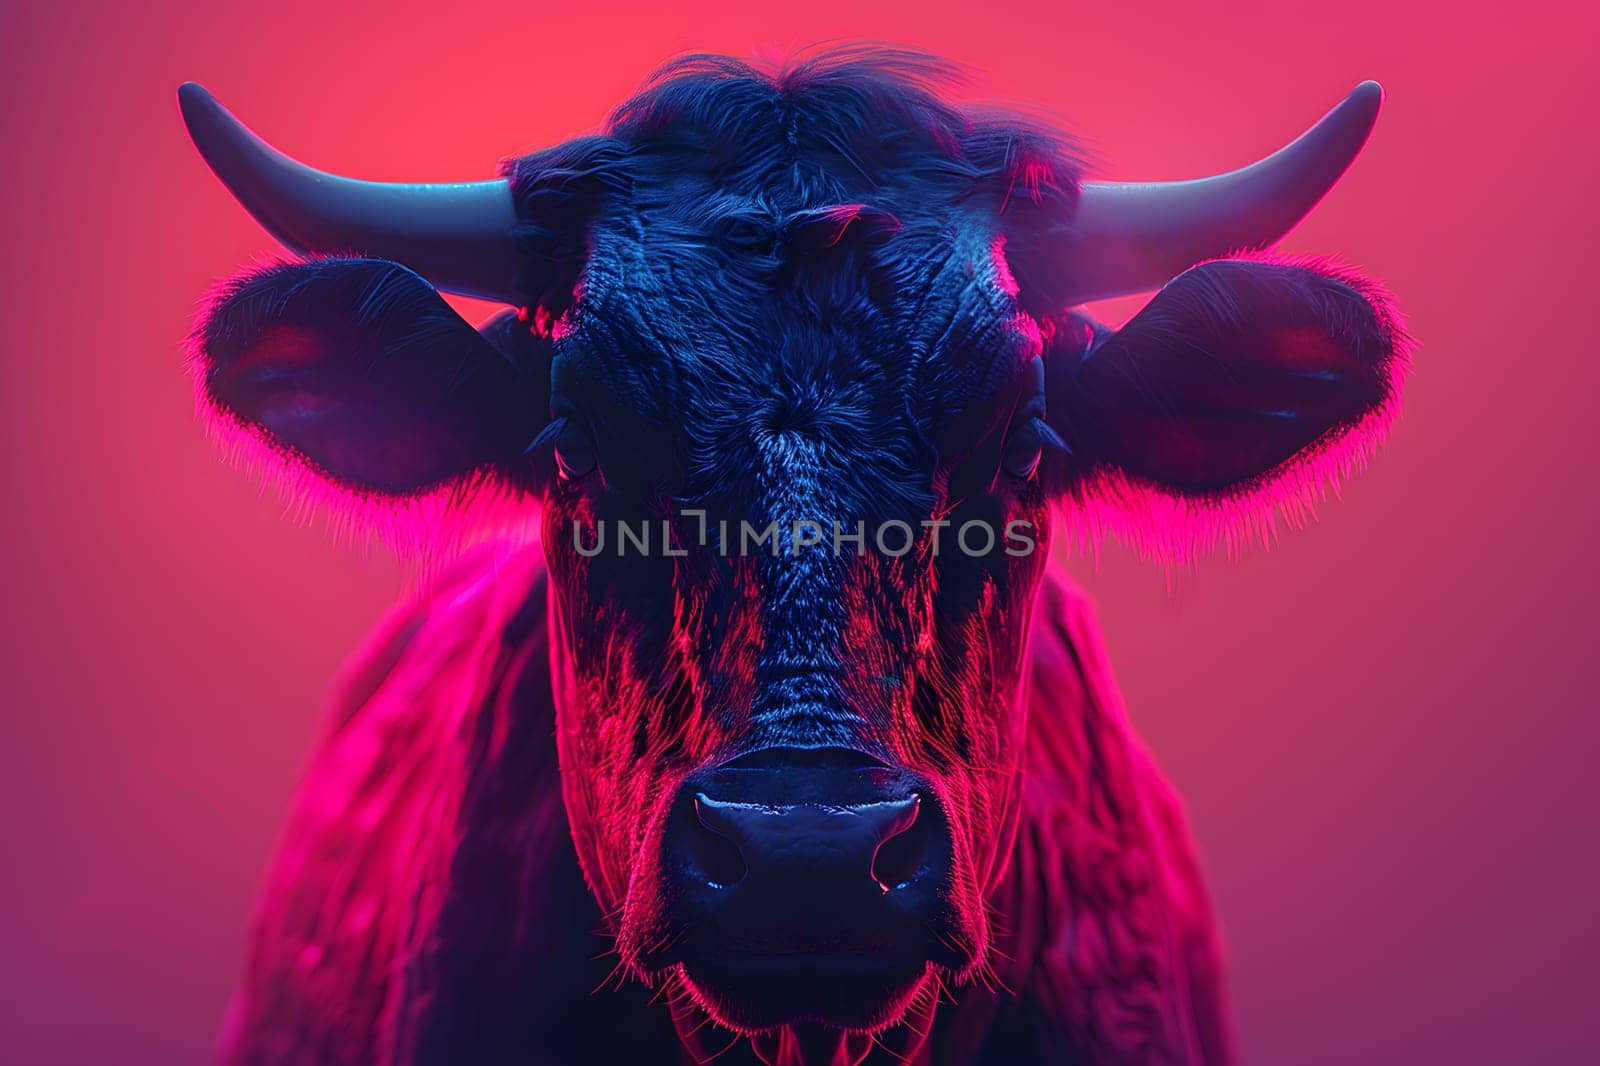 Closeup of a bulls head with horns on red background by Nadtochiy